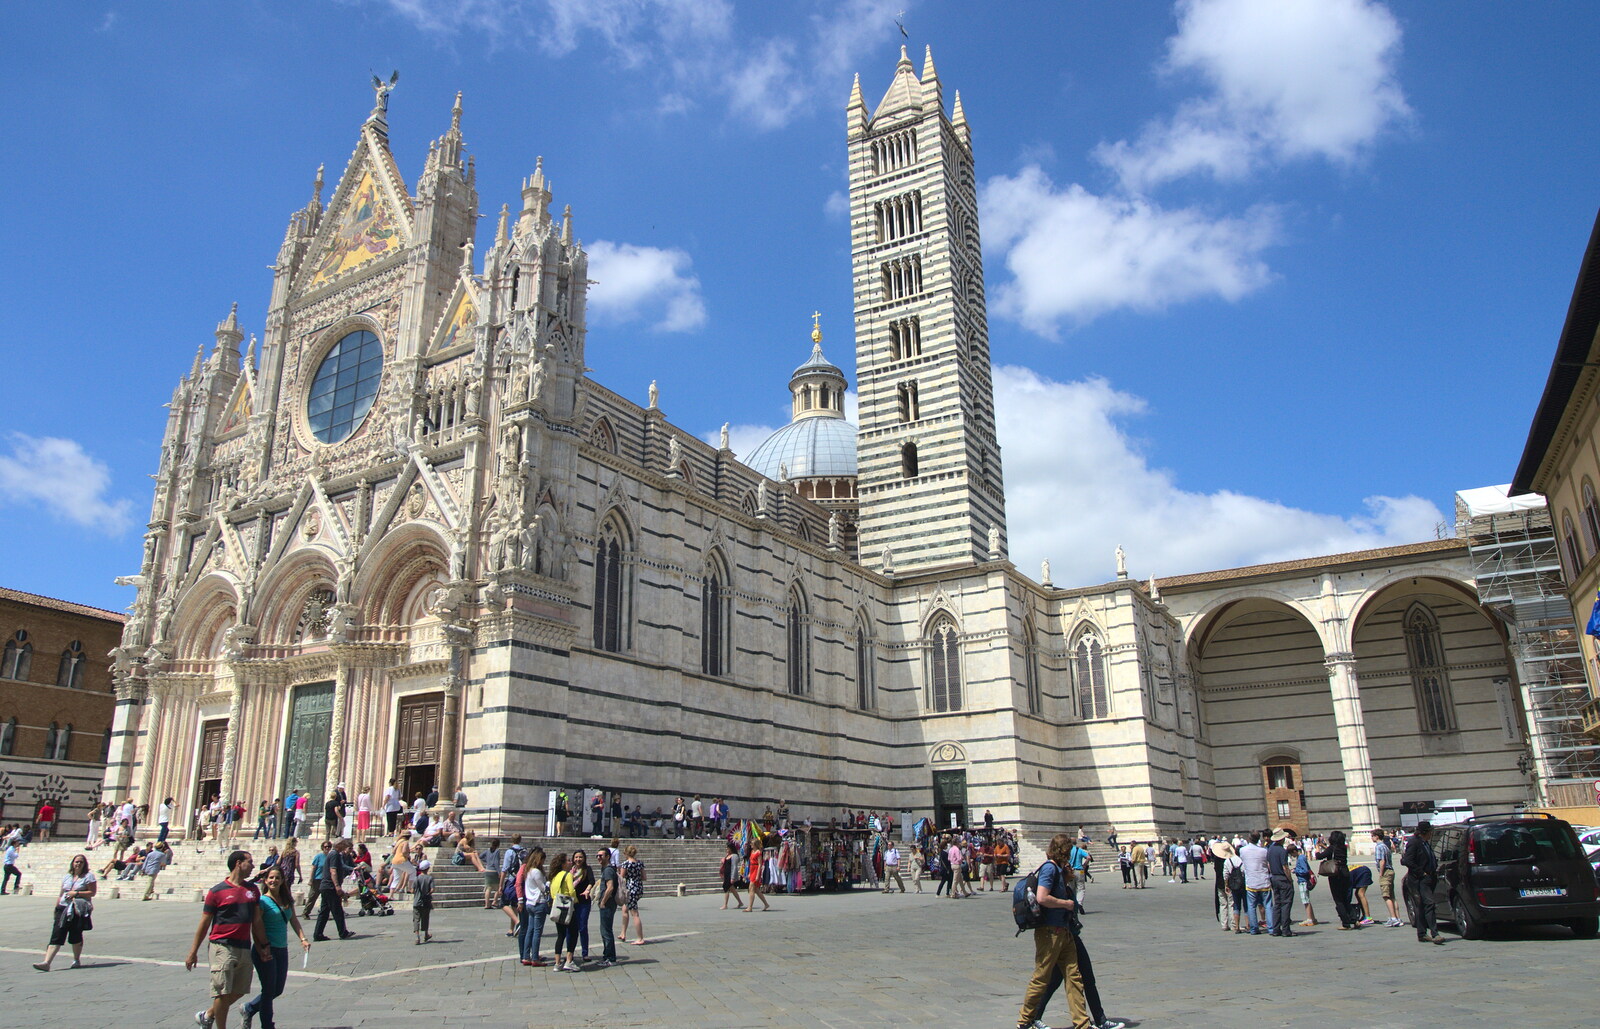 A Tuscan Winery and a Trip to Siena, Tuscany, Italy - 10th June 2013: The very-stripey Duomo di Siena